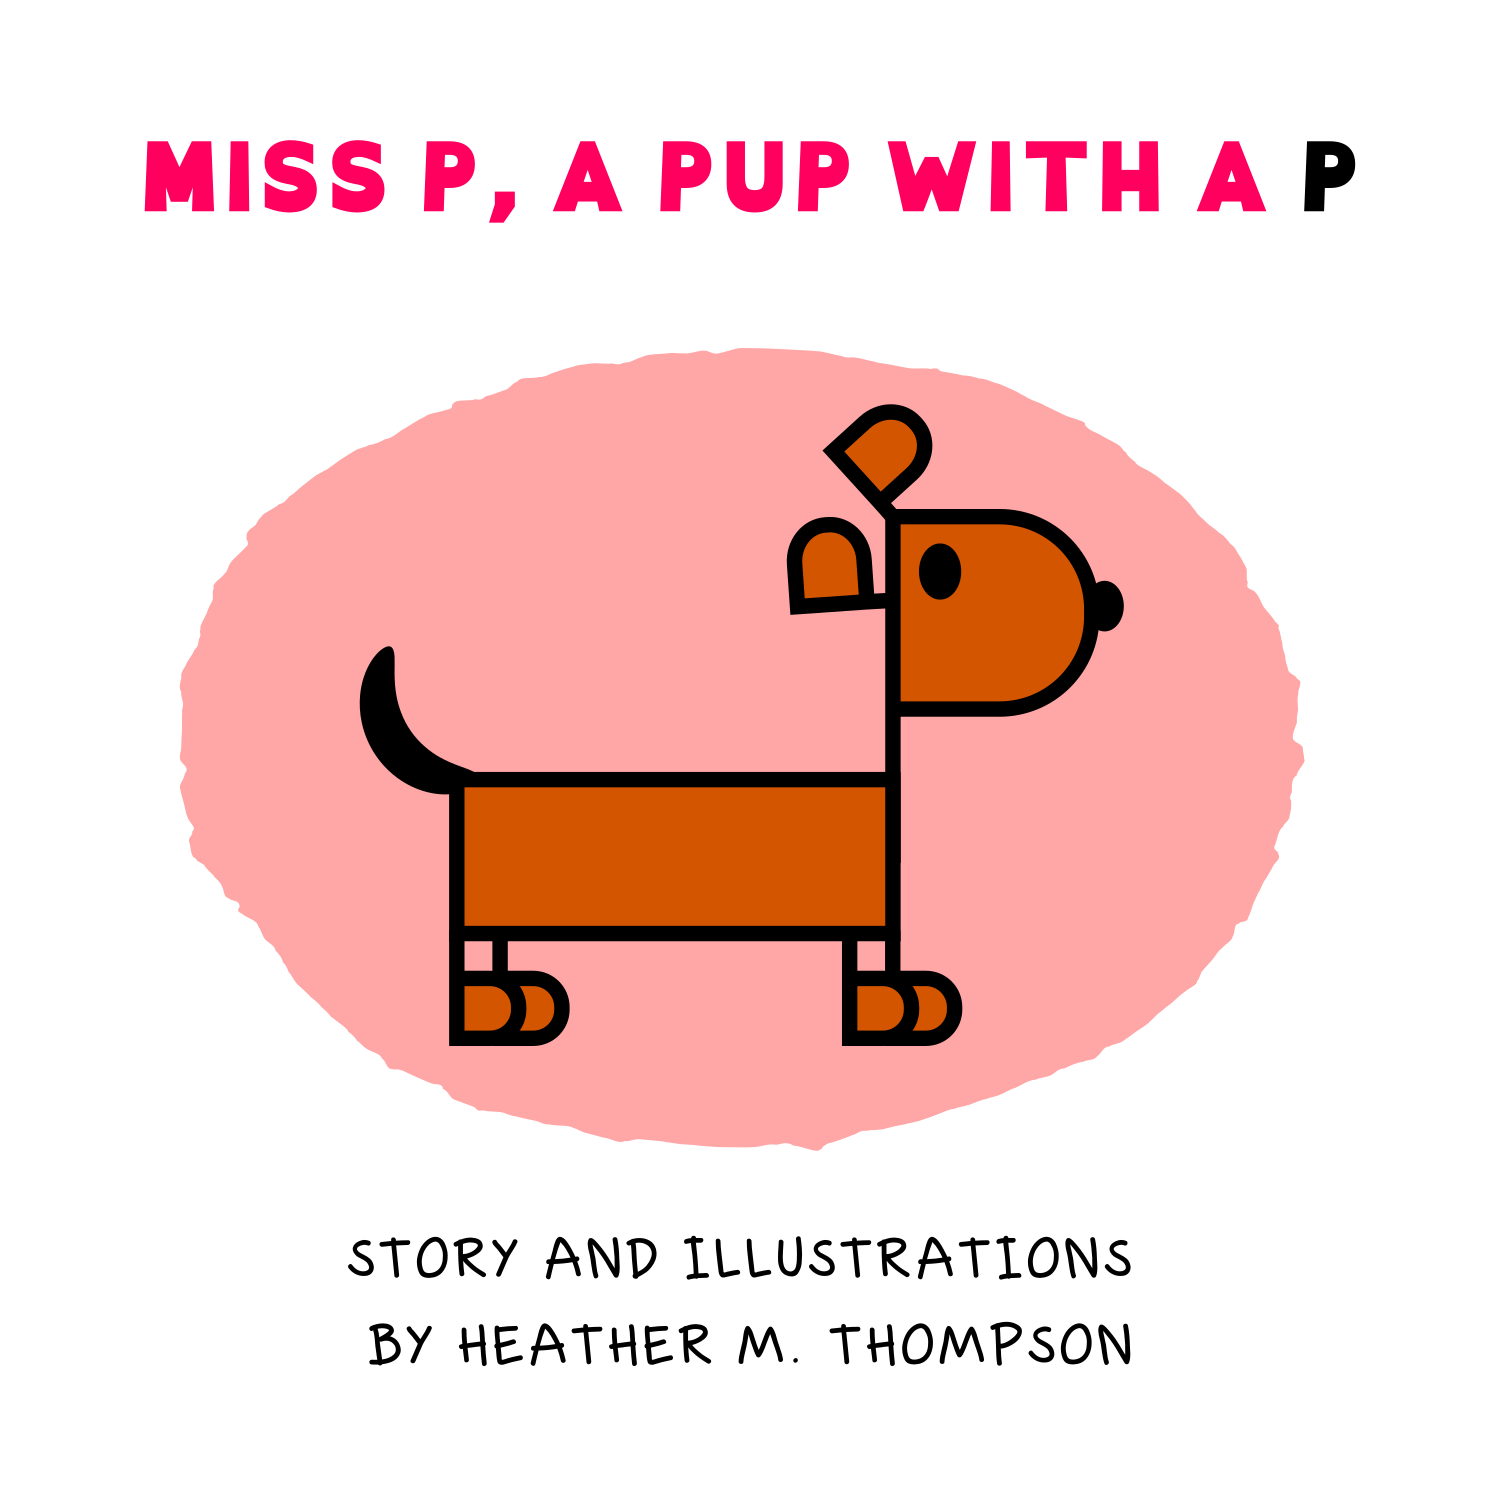 Cover of "Miss P, a Pup with a P," by Heather Thompson.